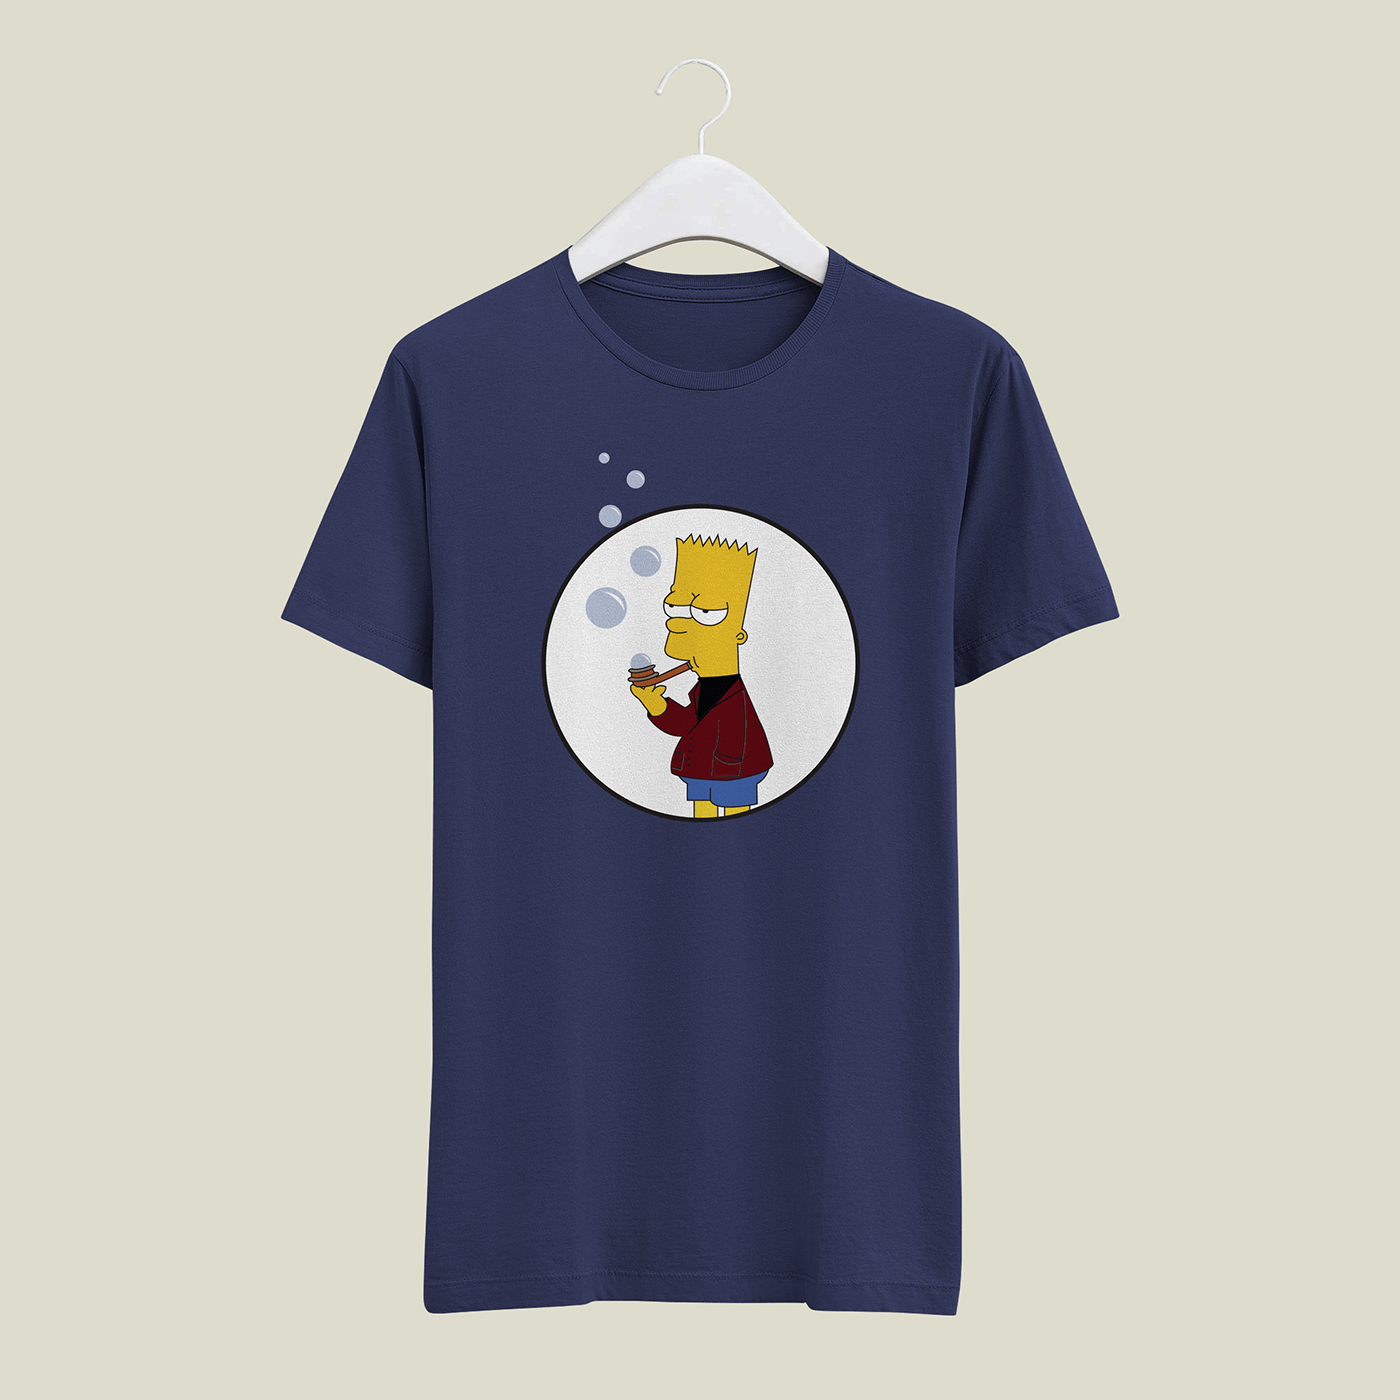 design the simpsons tshirts vector